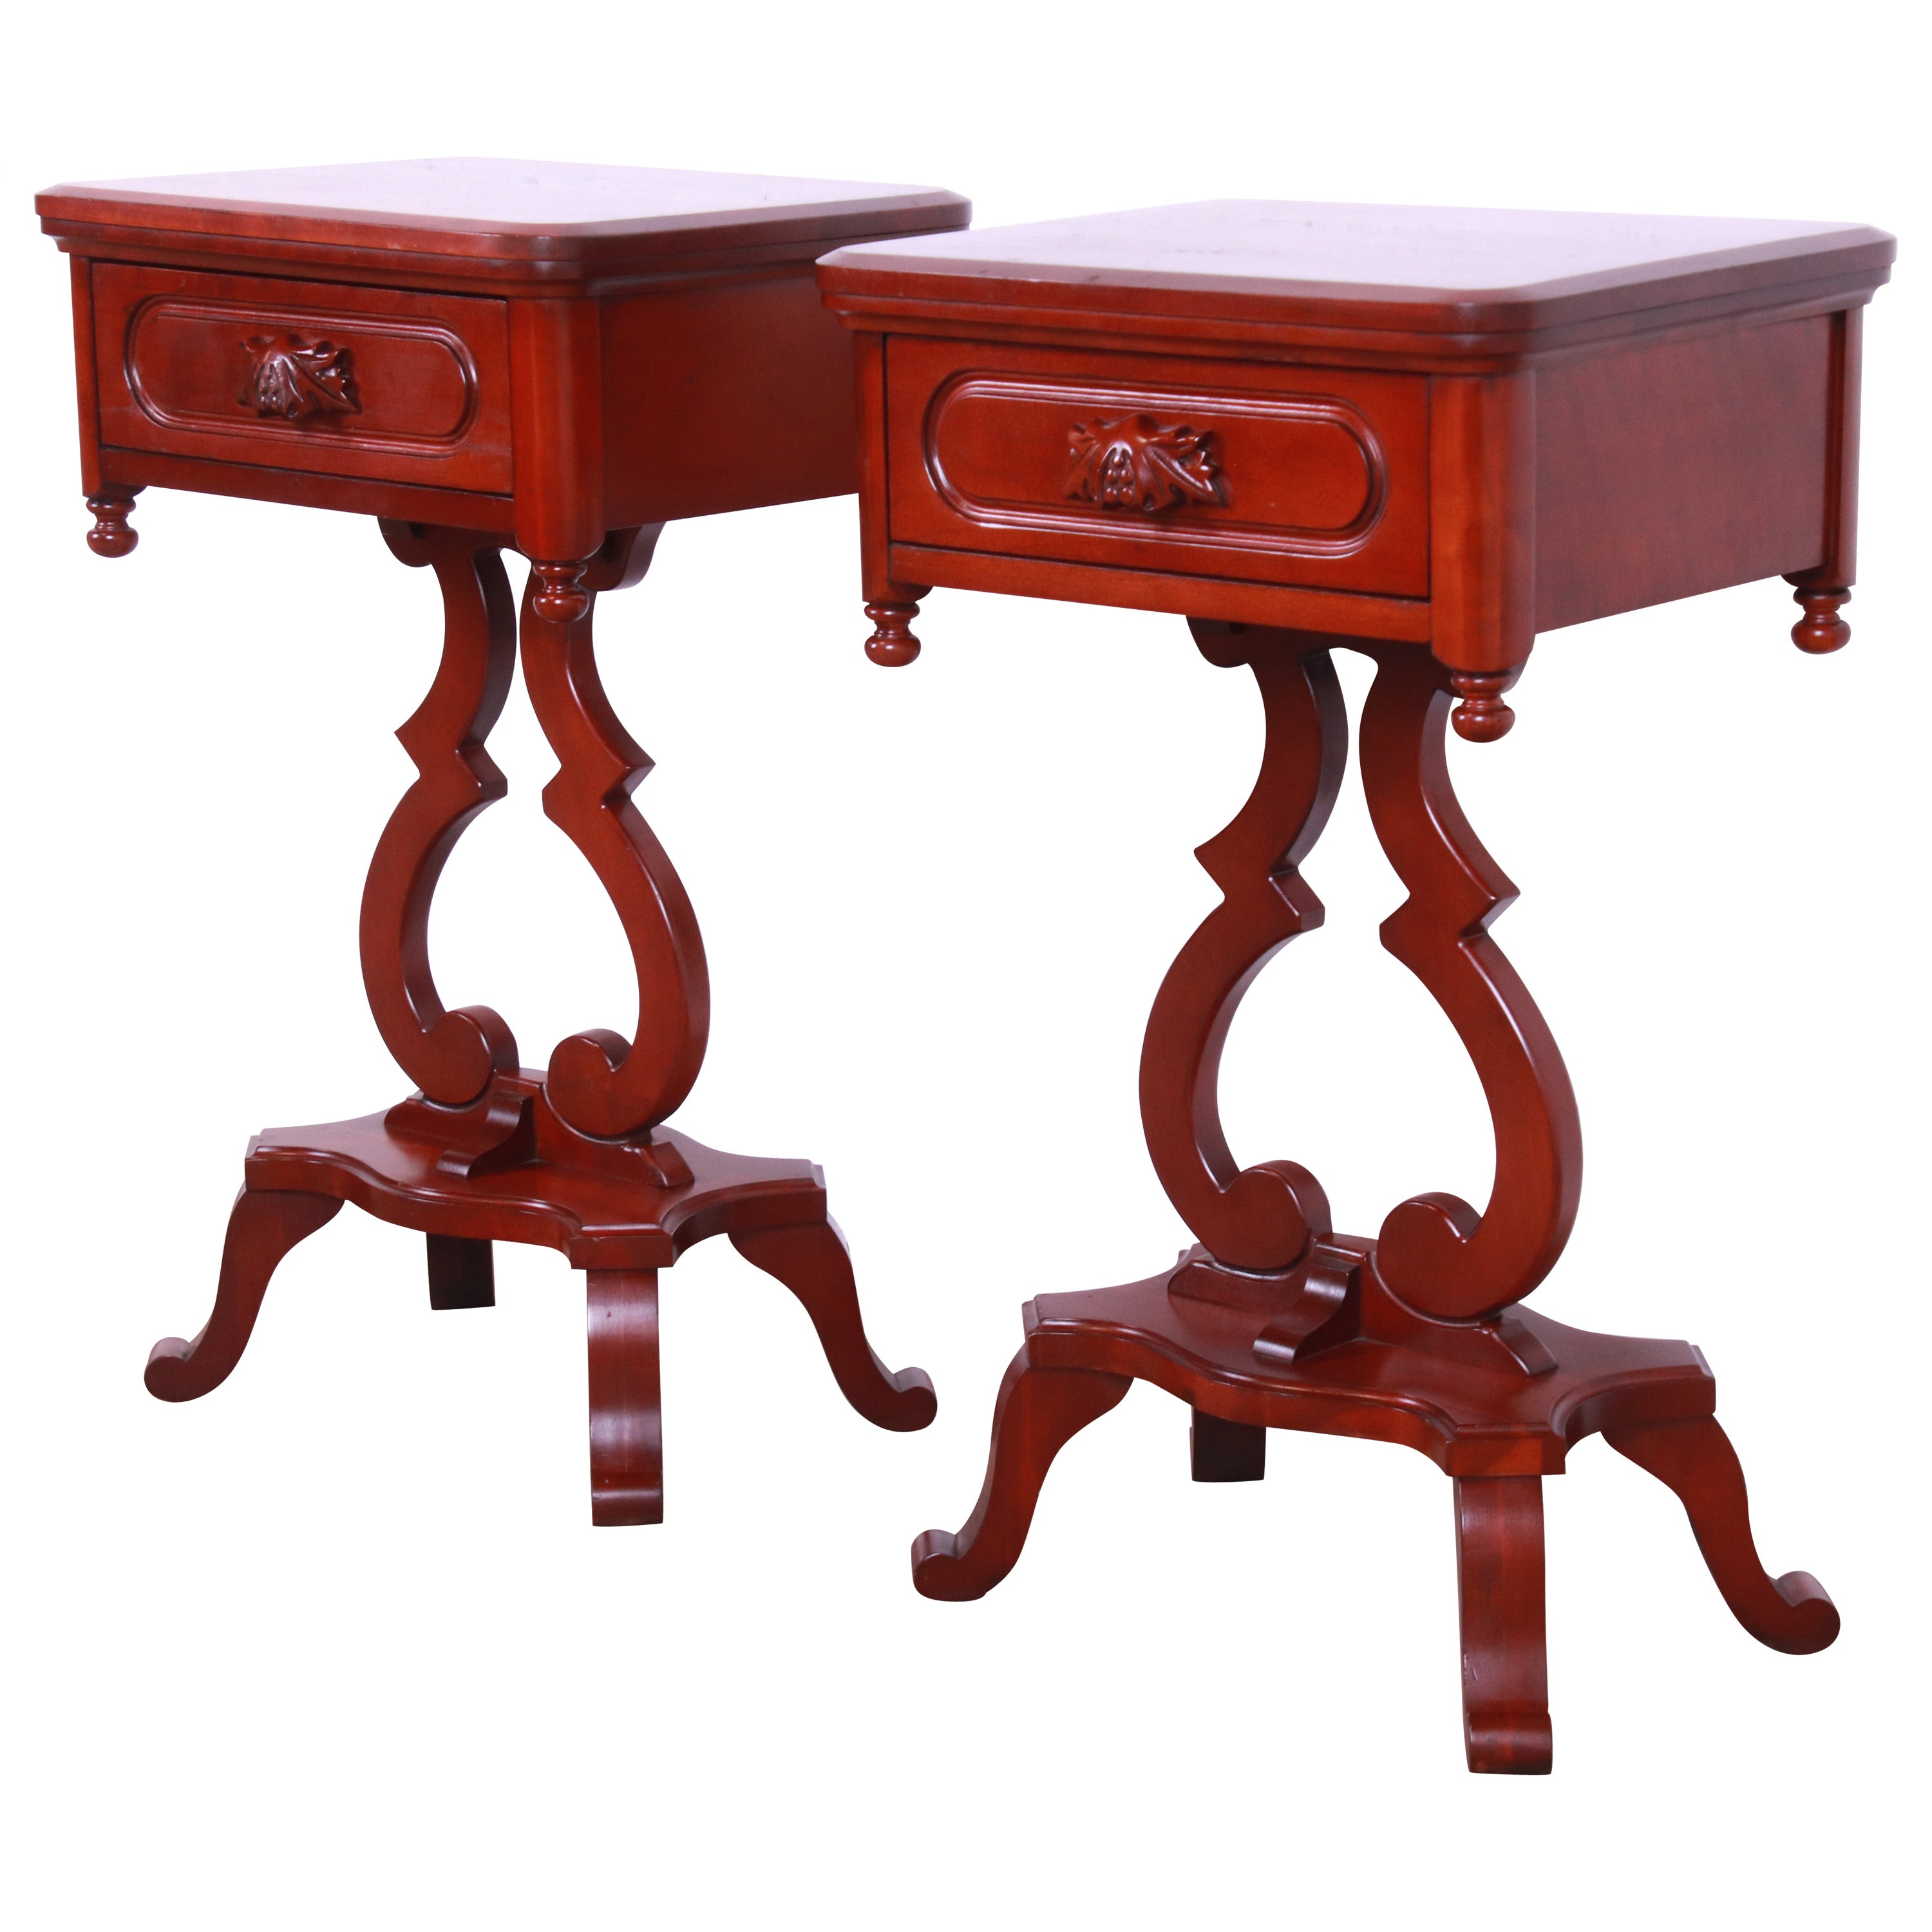 Lillian Russell Collection Victorian Cherry Nightstands by Davis Cabinet Co.